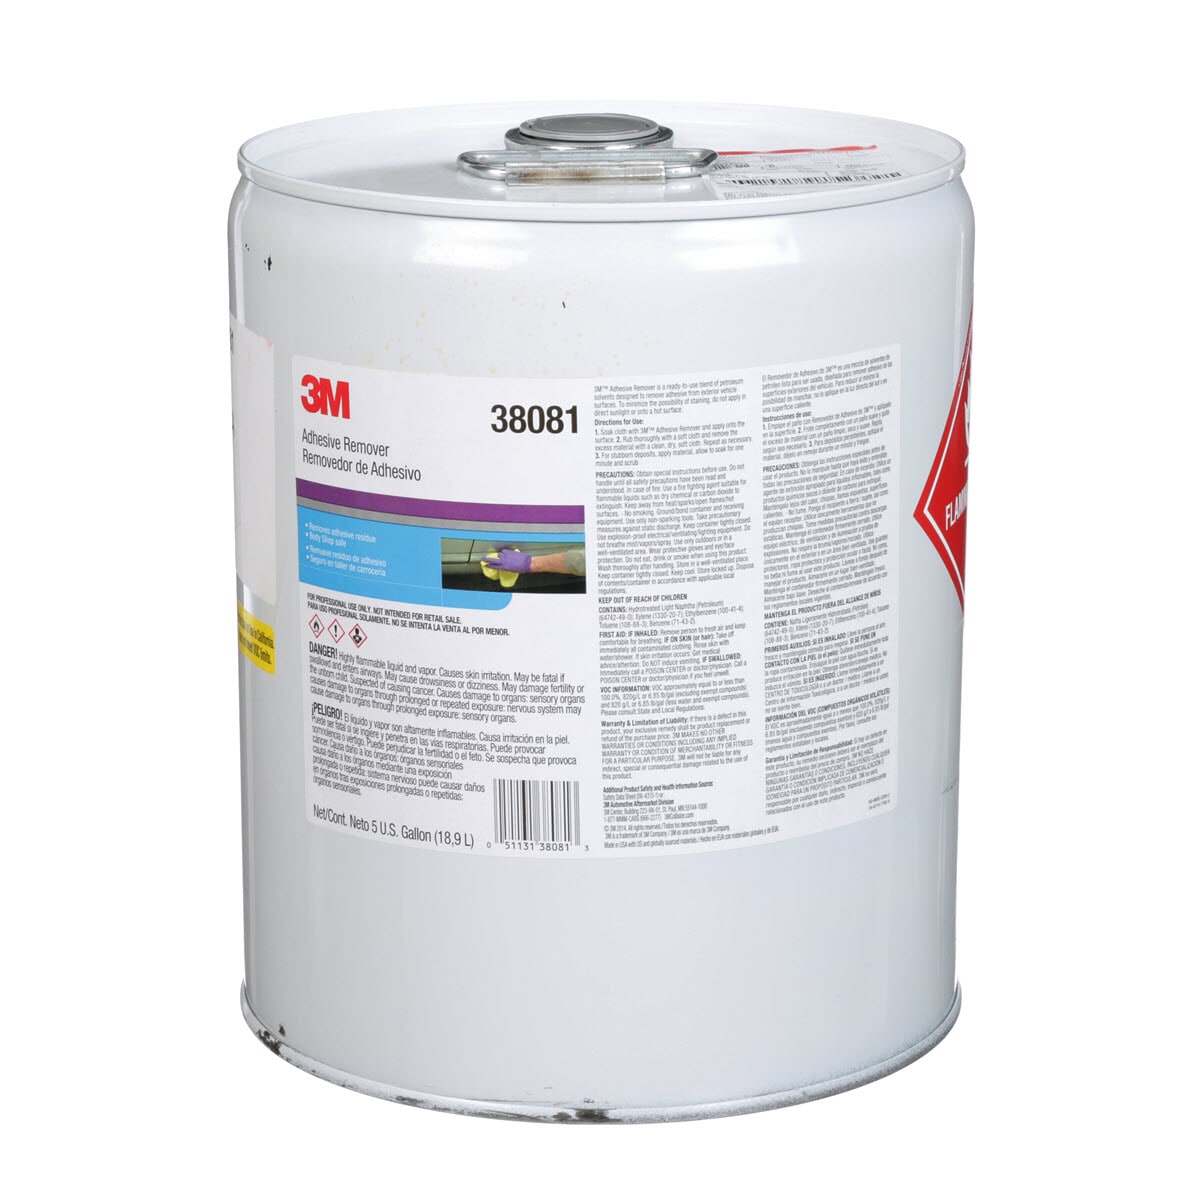 3M 7000045720 Flammable Ready-to-Use Remover, 5 gal Container Pail Container, Liquid Form, Red, Sharp Aromatic Solvent Odor/Scent